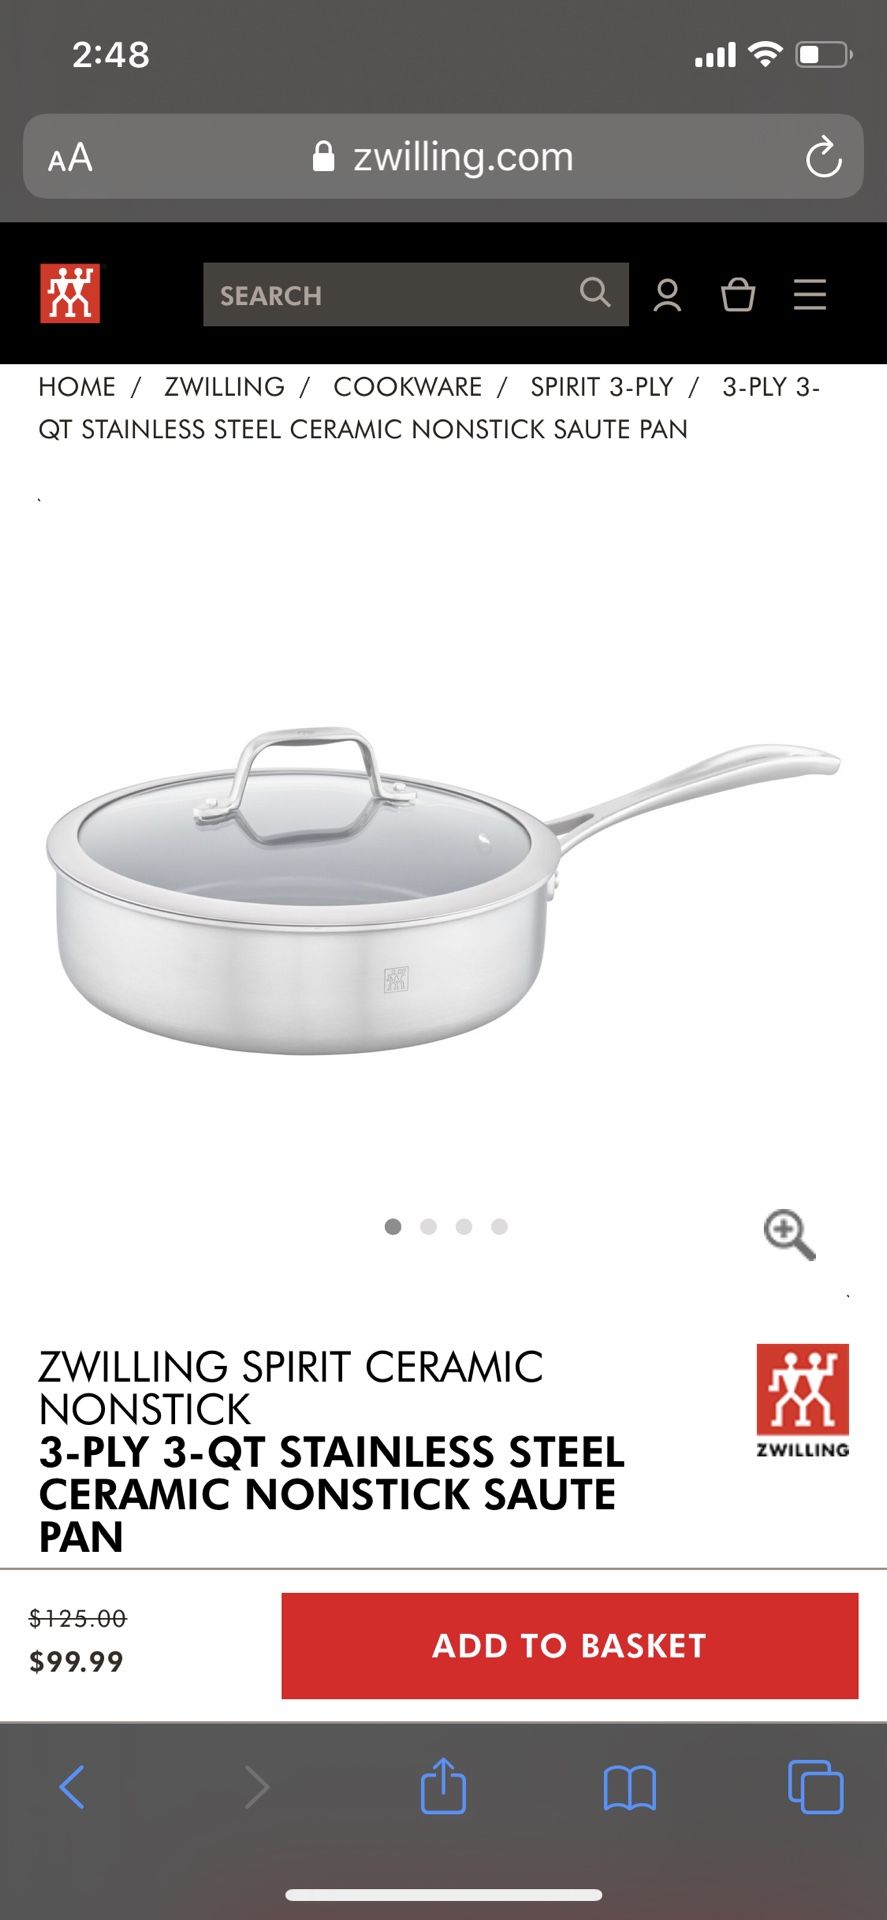 Zwilling 3-PLY 3-QT stainless steel ceramic nonstick sauté pan